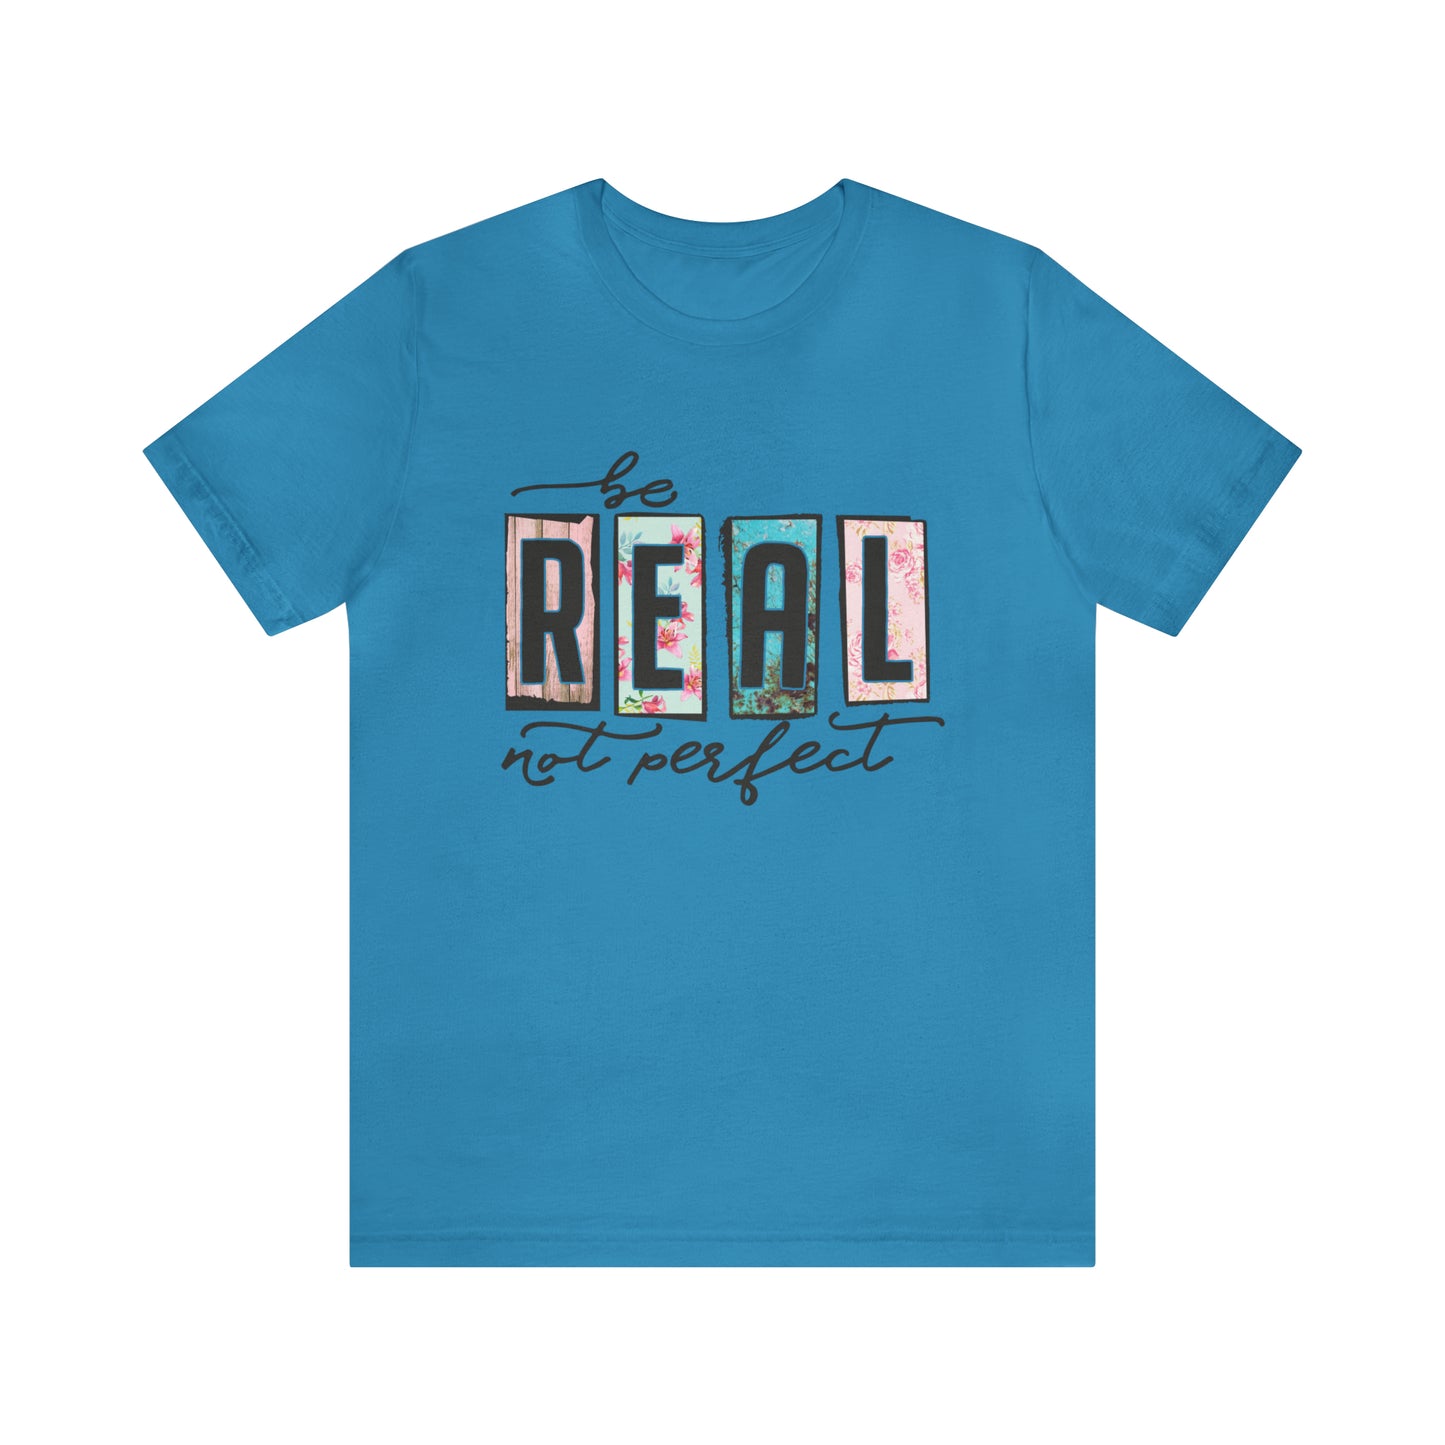 Be real not perfect Short Sleeve Women's Tee